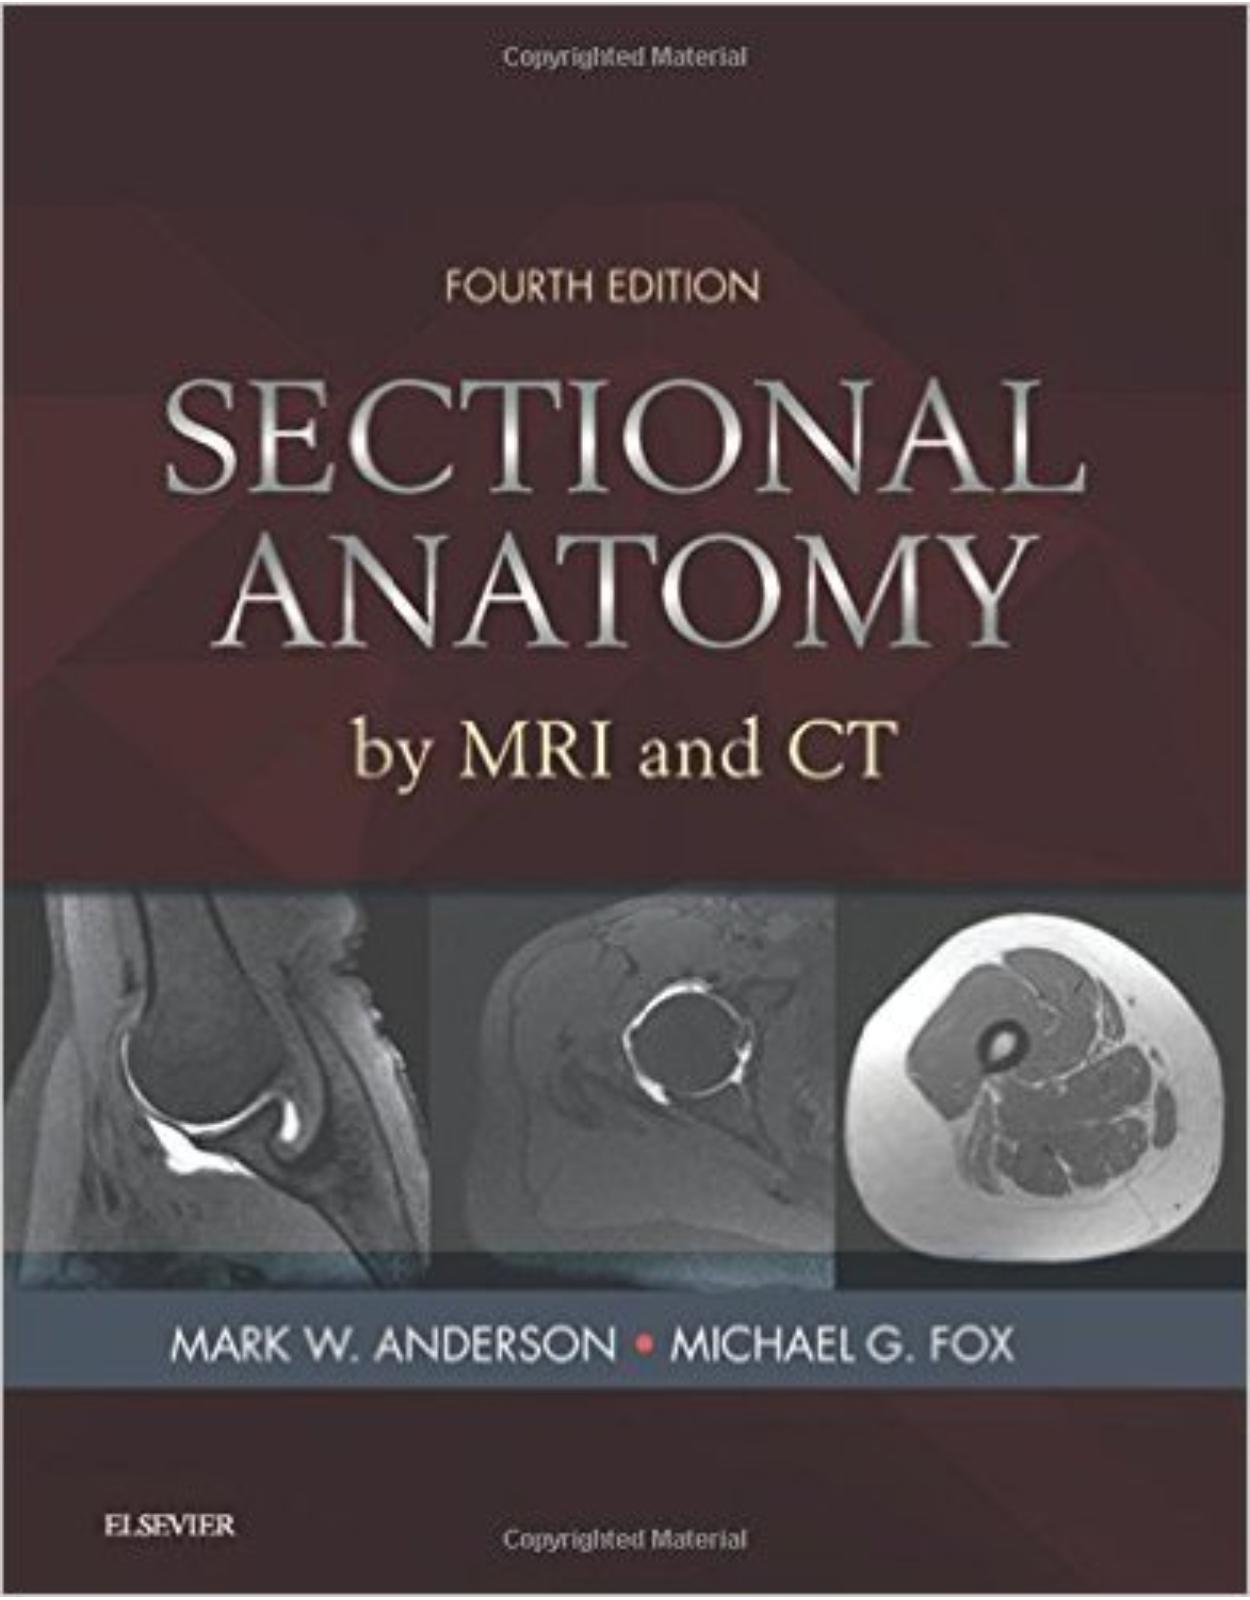 Sectional Anatomy by MRI and CT, 4e